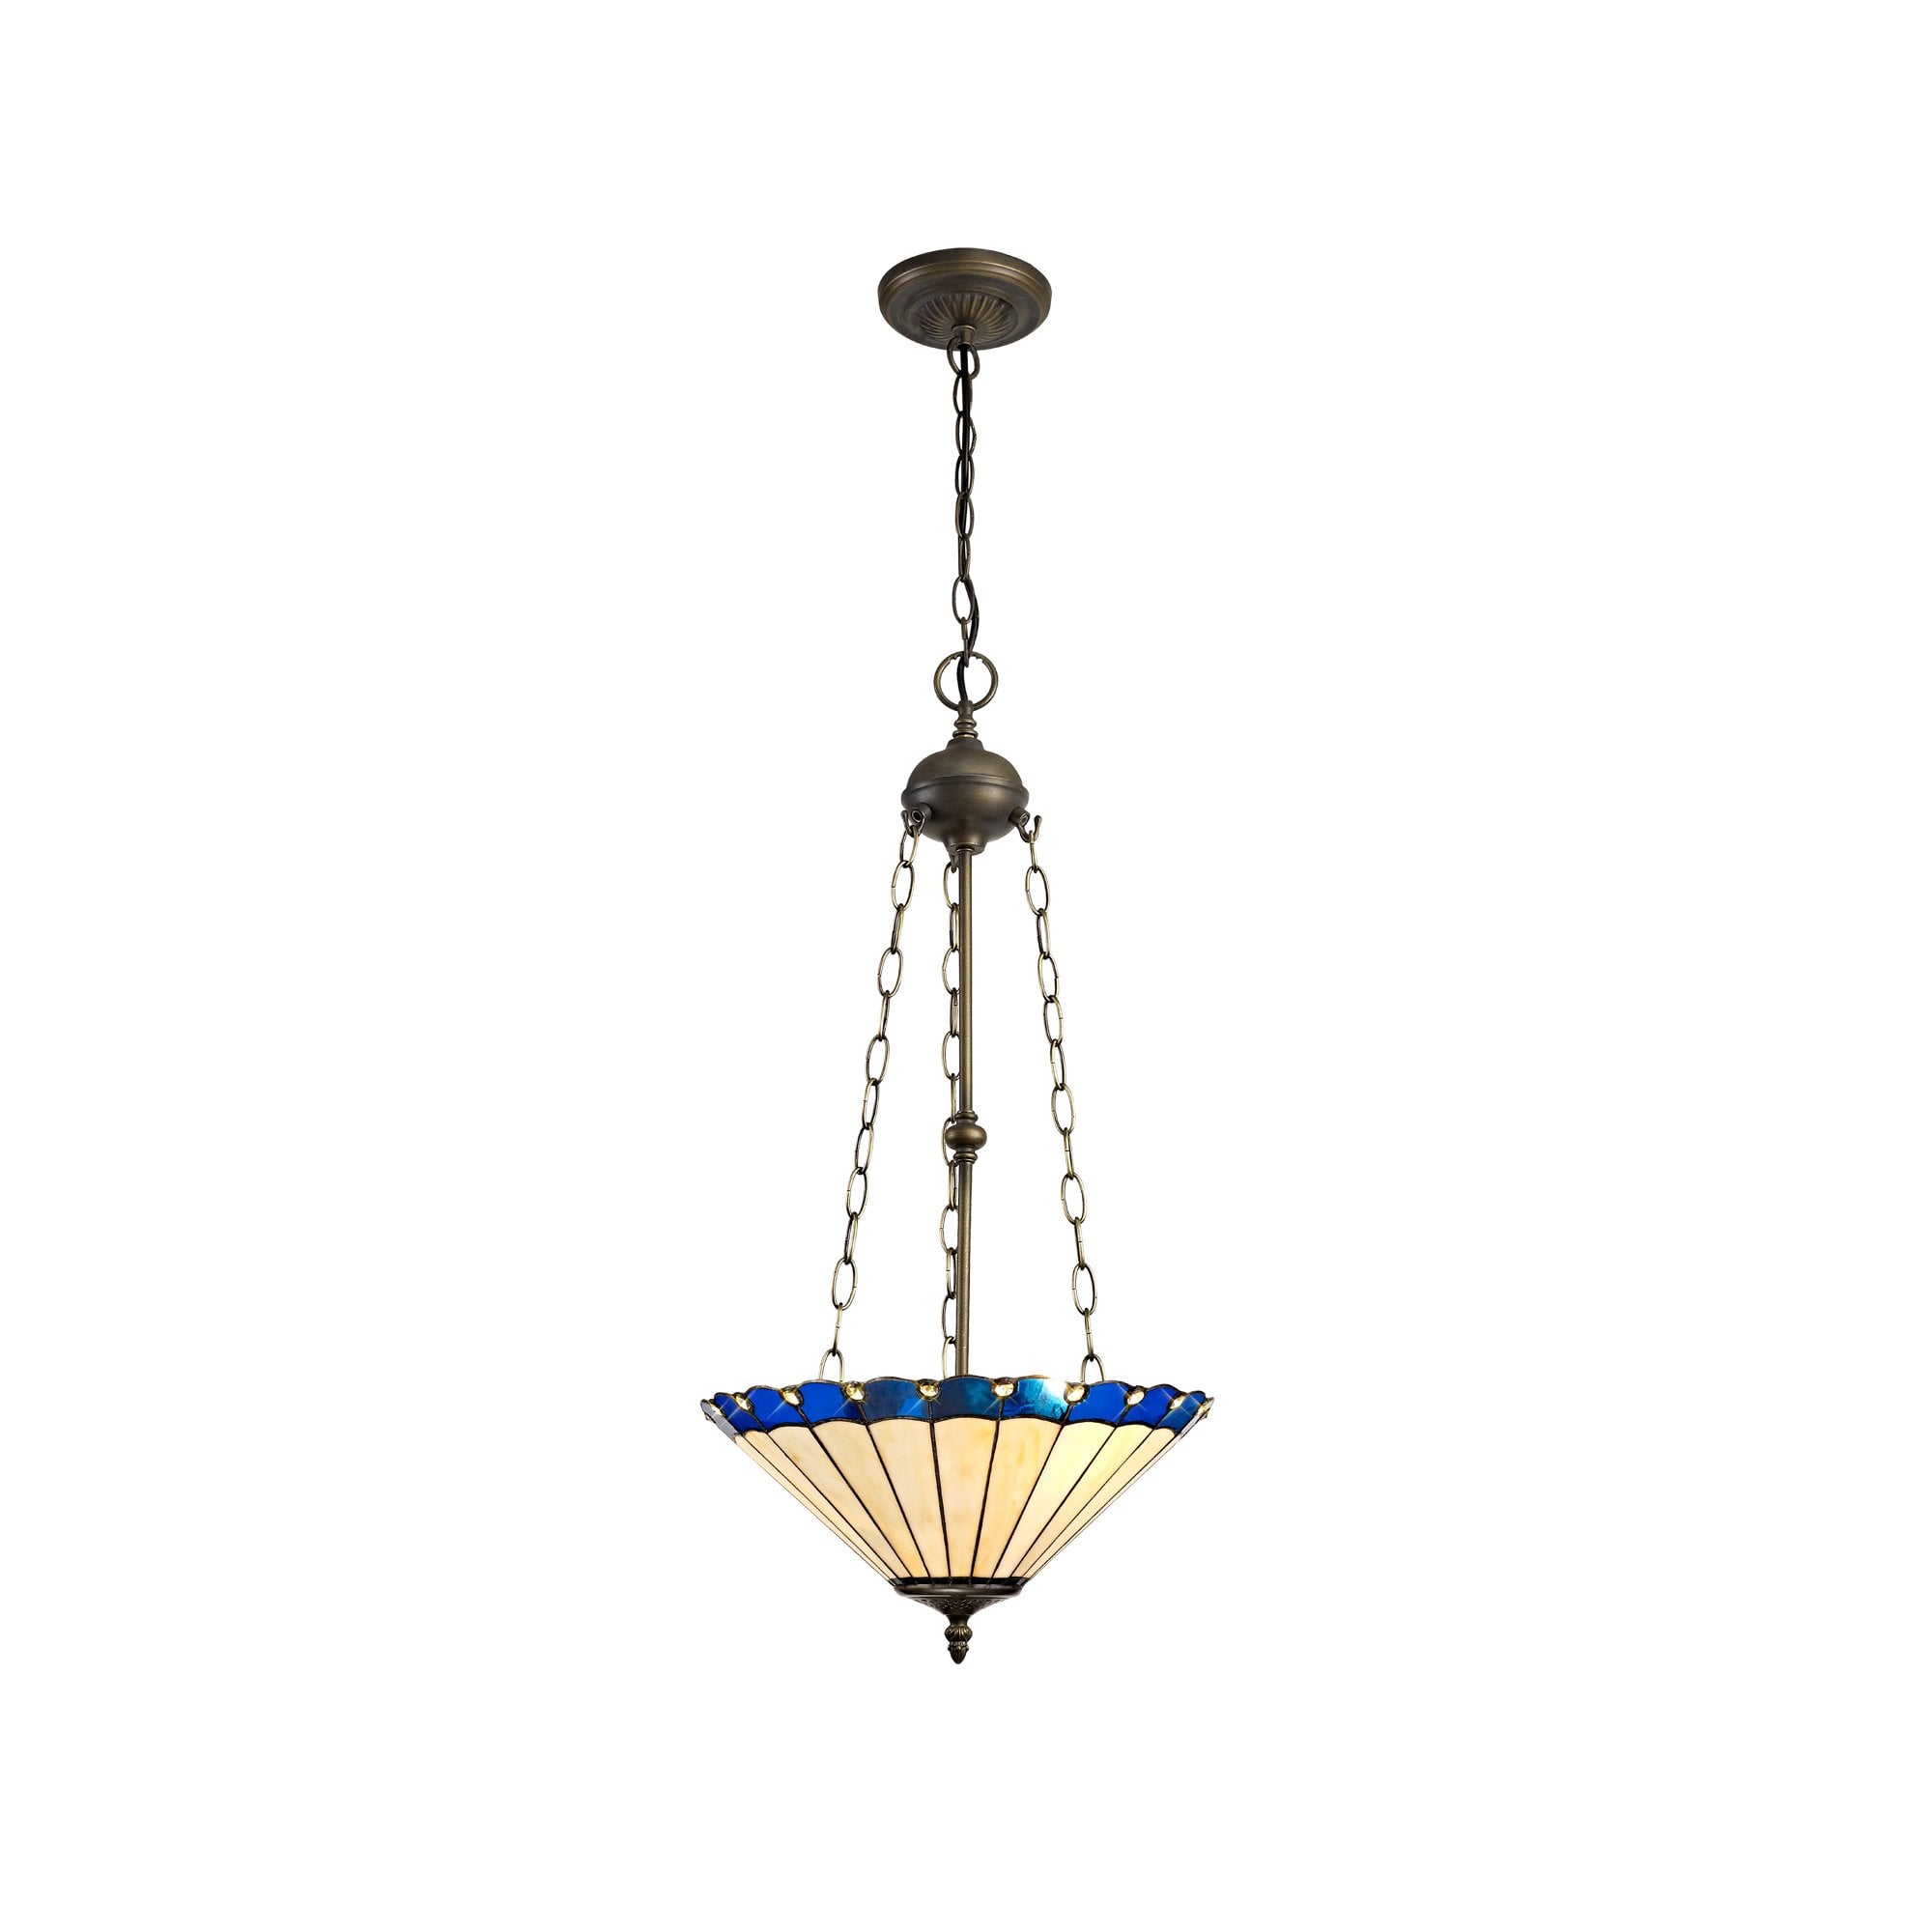 3 Light Uplighter Pendant E27 With 40cm Tiffany Shade, Blue/Cream/Crystal/Aged Antique Brass